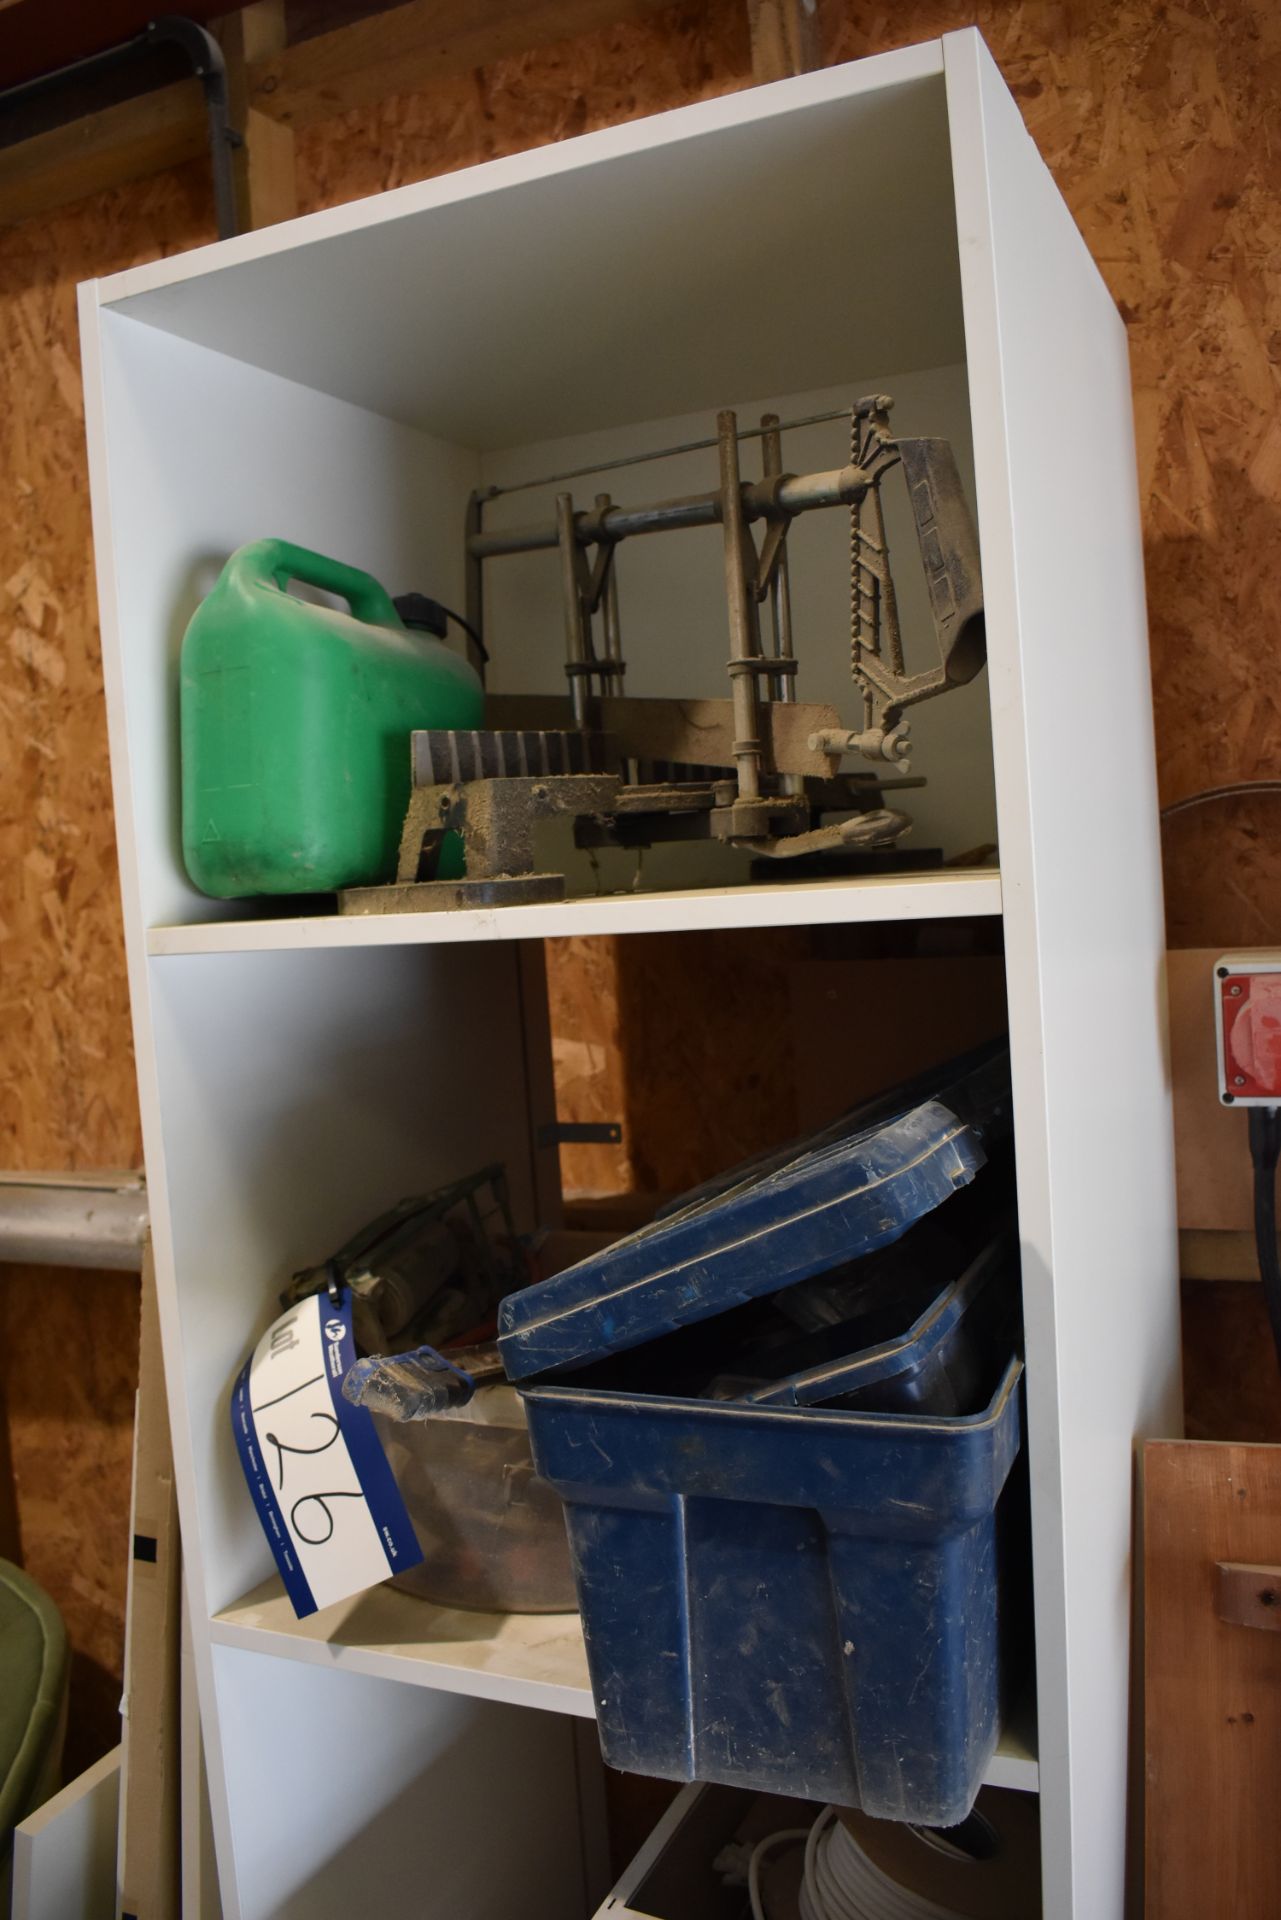 Hand Winch, Foot Pump & Assorted Carpentry Tools, as set out on shelf